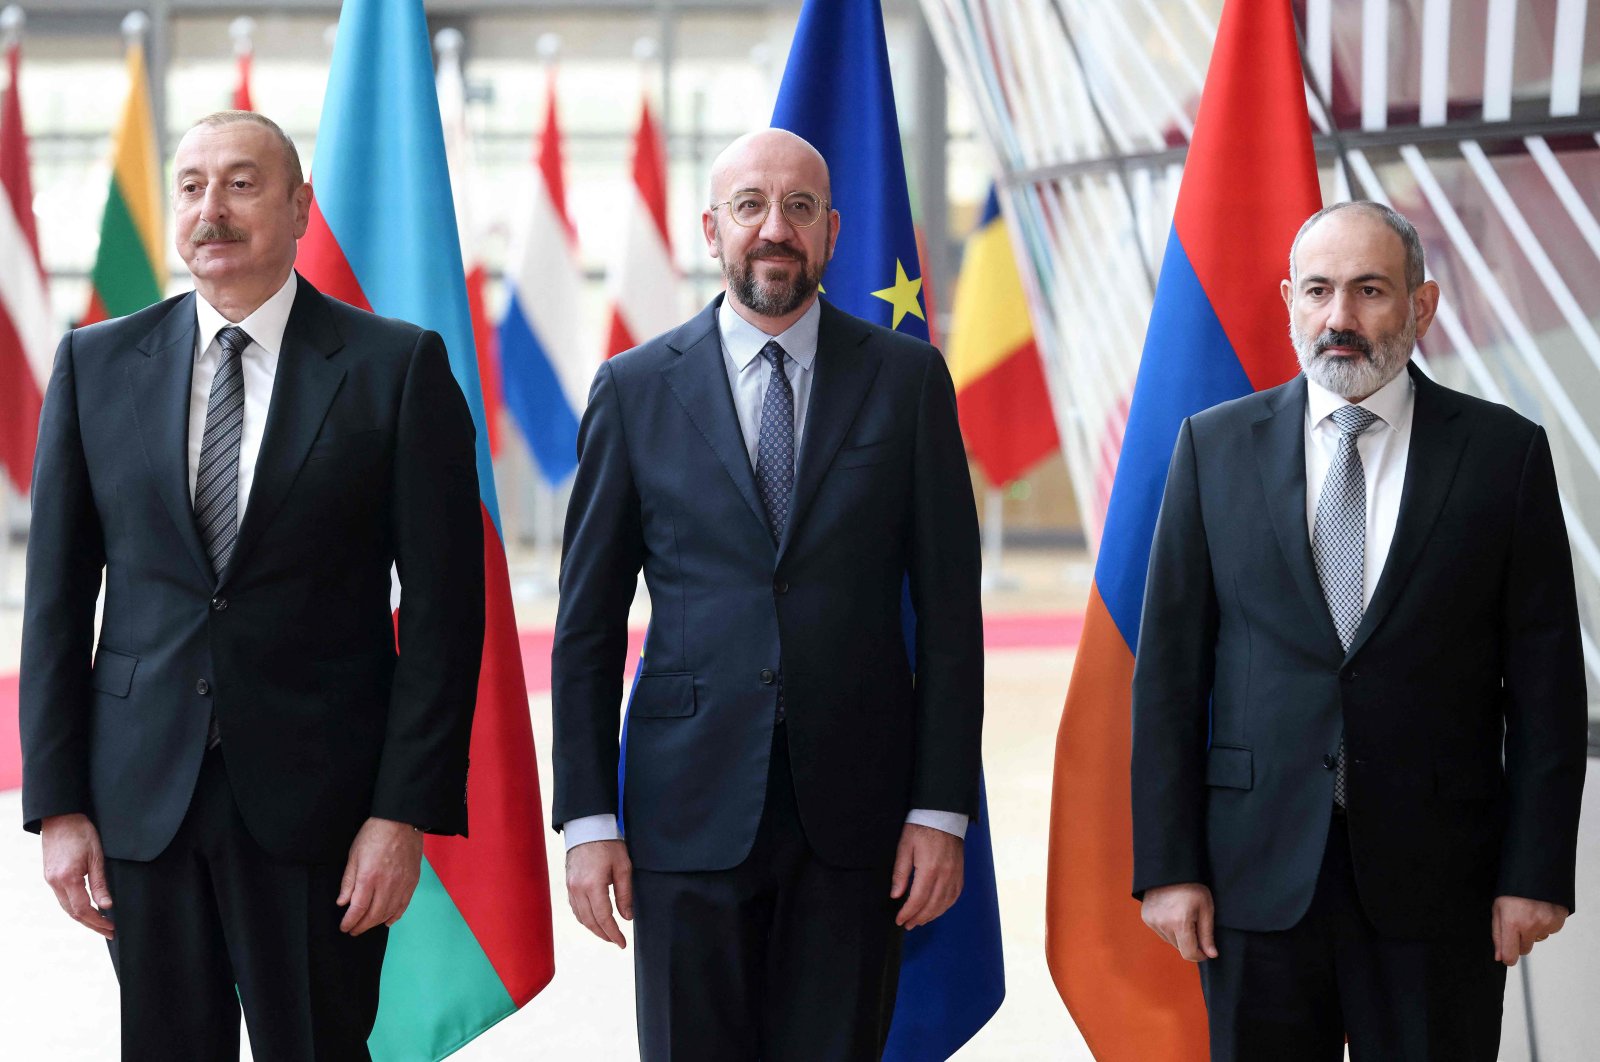 From left to right, Azerbaijani President Ilham Aliyev, European Council President Charles Michel and Armenian Prime Minister Nikol Pashinian pose for an official photograph before their meeting at the European Council in Brussels, Belgium, May 14, 2023. (AFP Photo)